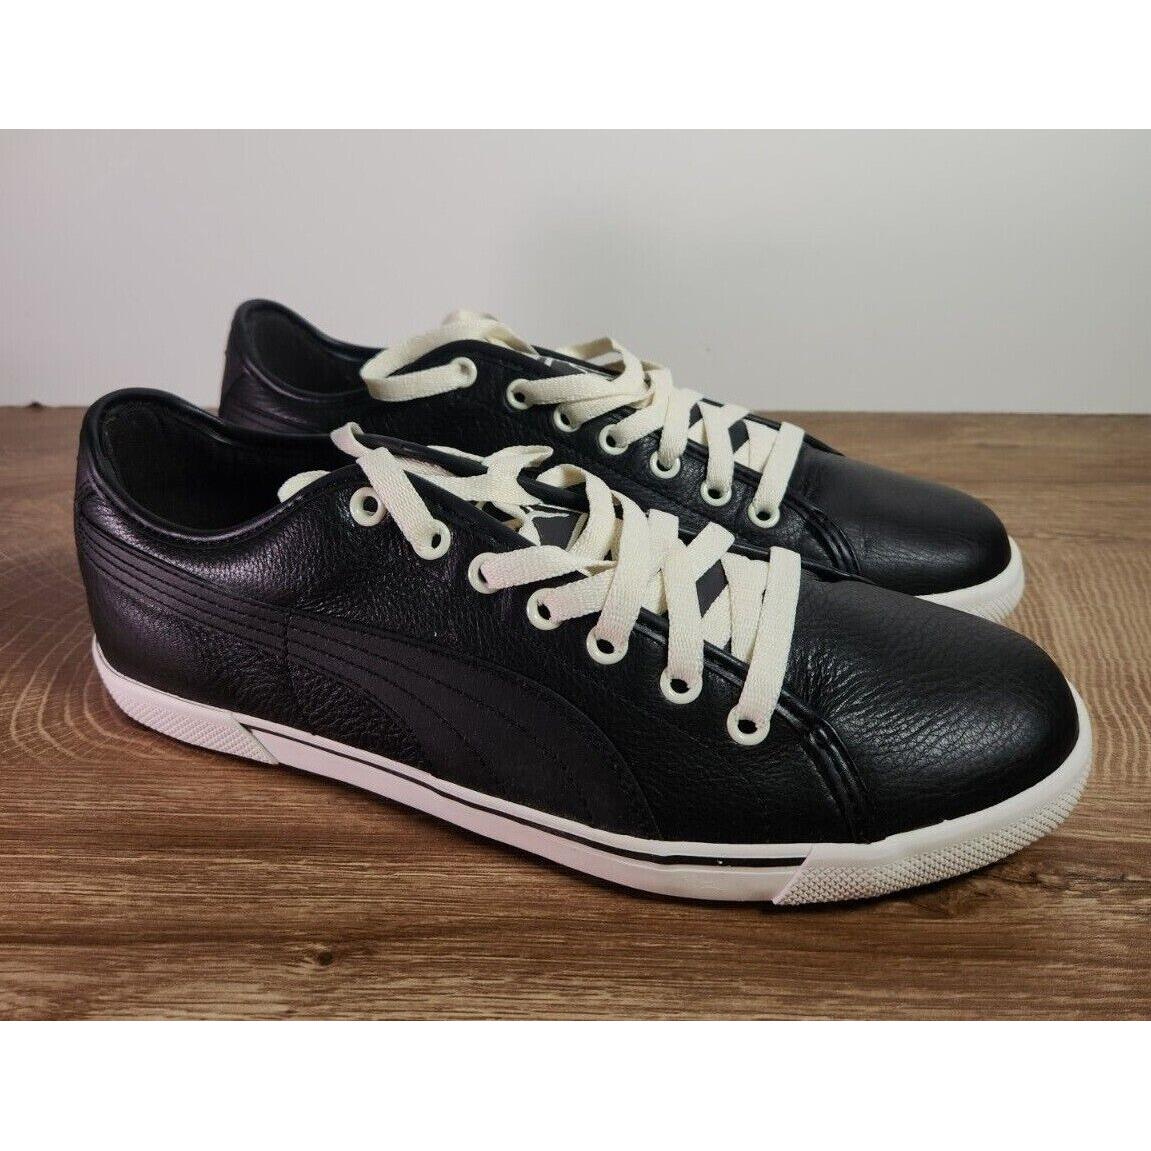 Puma Shoes Mens Size 9 Benecio Leather Track Running Sneakers Lace Up | 051211308140 - Puma shoes - Black | SporTipTop